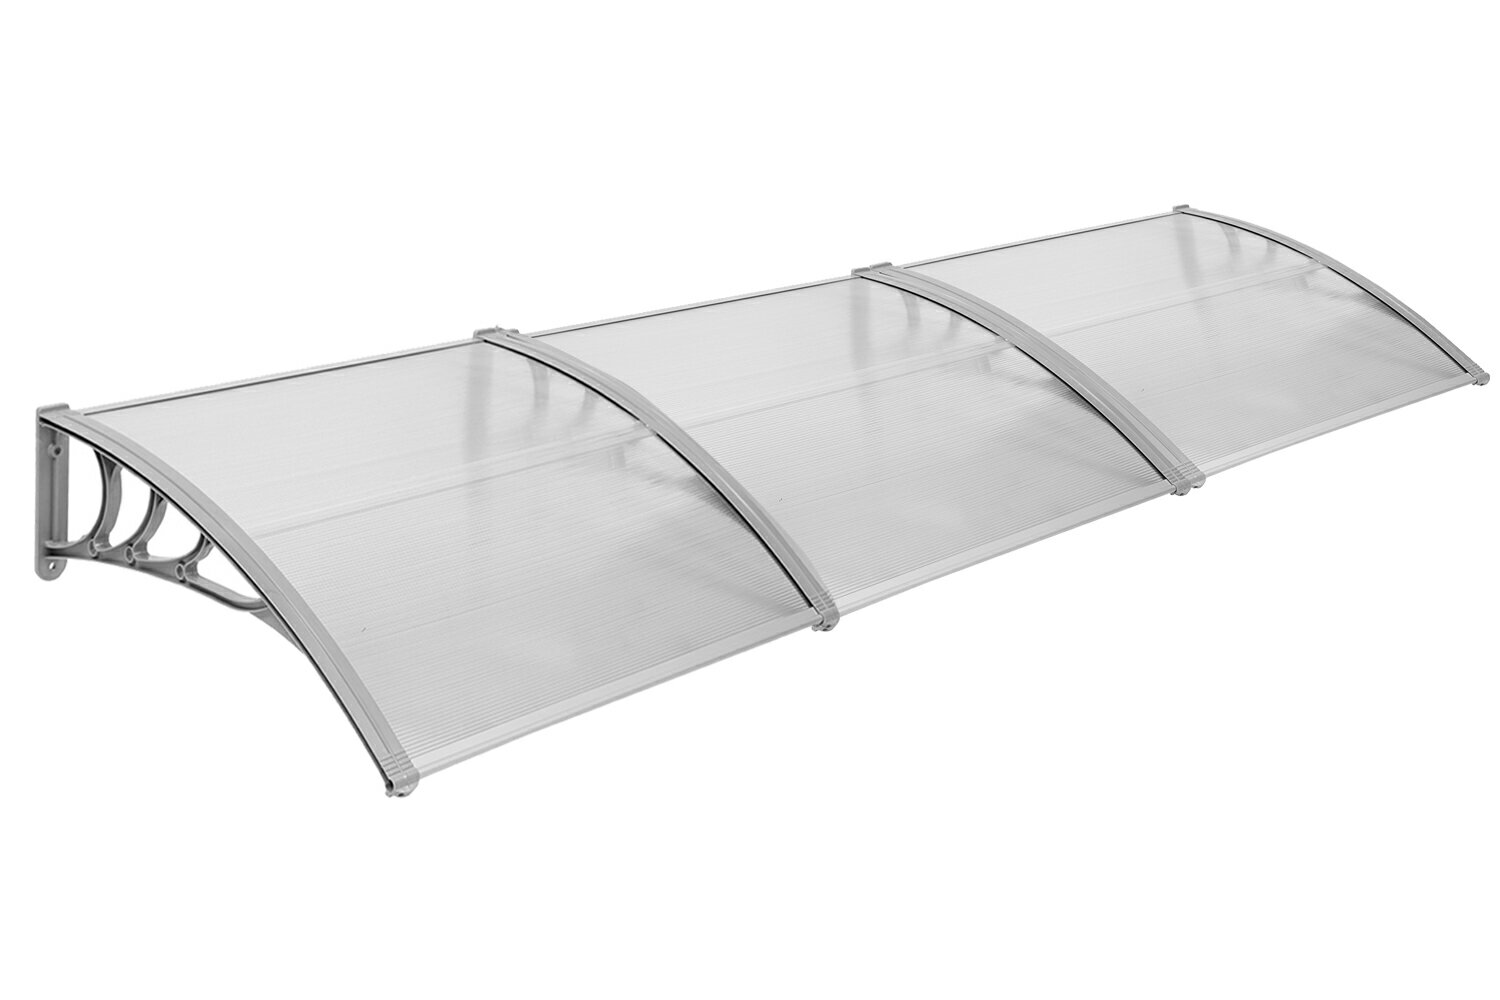 Mcombo MCombo 40x120 Window Awning Outdoor Polycarbonate Front